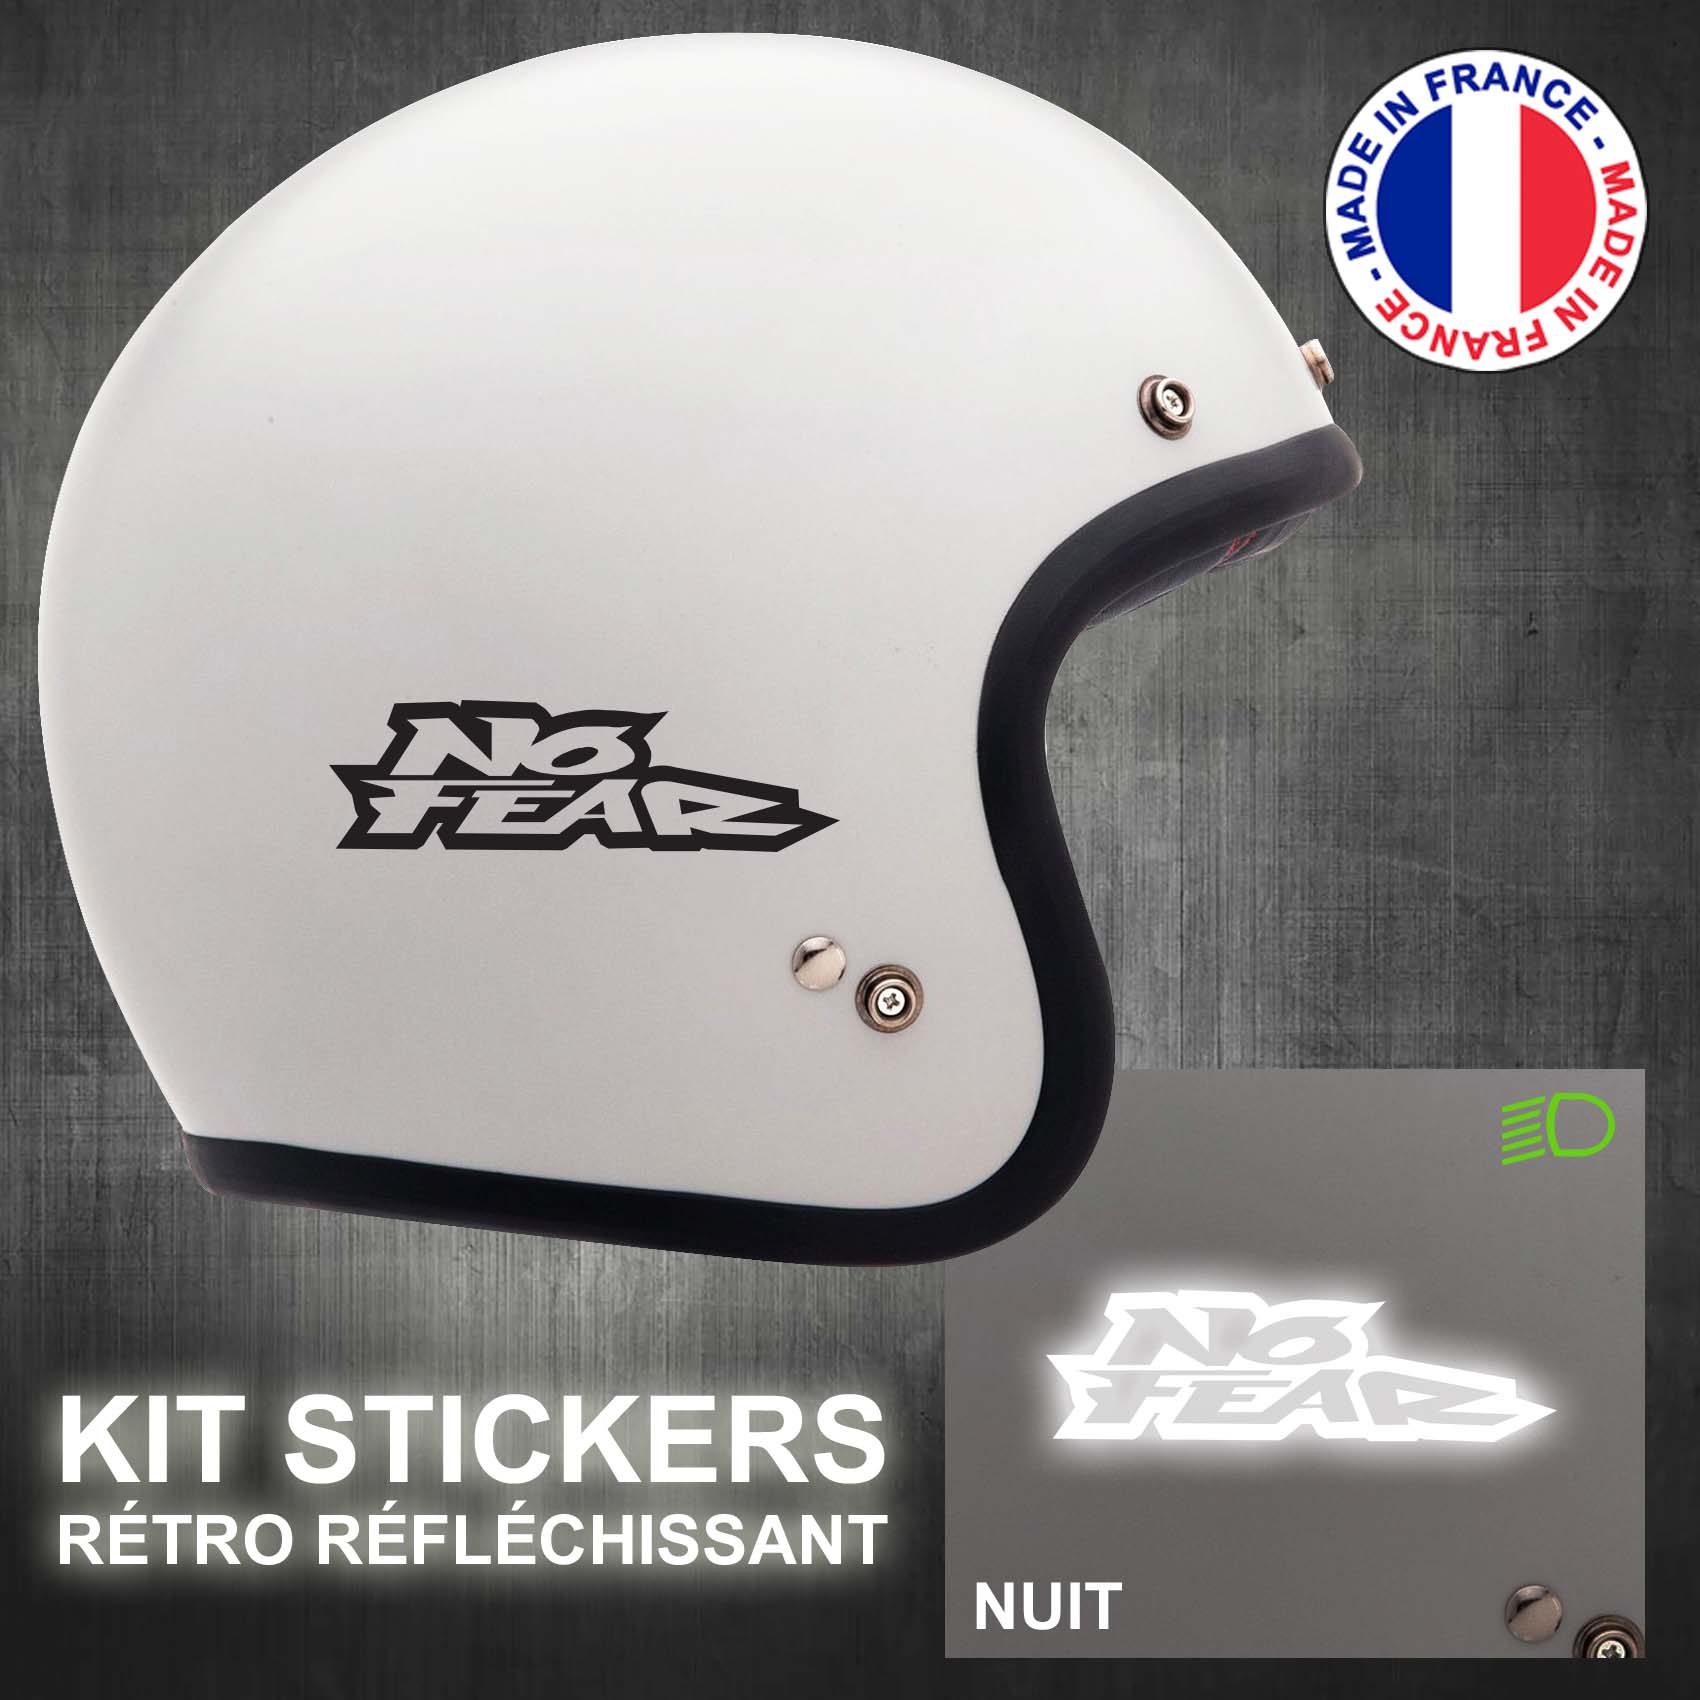 stickers-casque-moto-no-fear-ref2-retro-reflechissant-autocollant-moto-velo-tuning-racing-route-sticker-casques-adhesif-scooter-nuit-securite-decals-personnalise-personnalisable-min